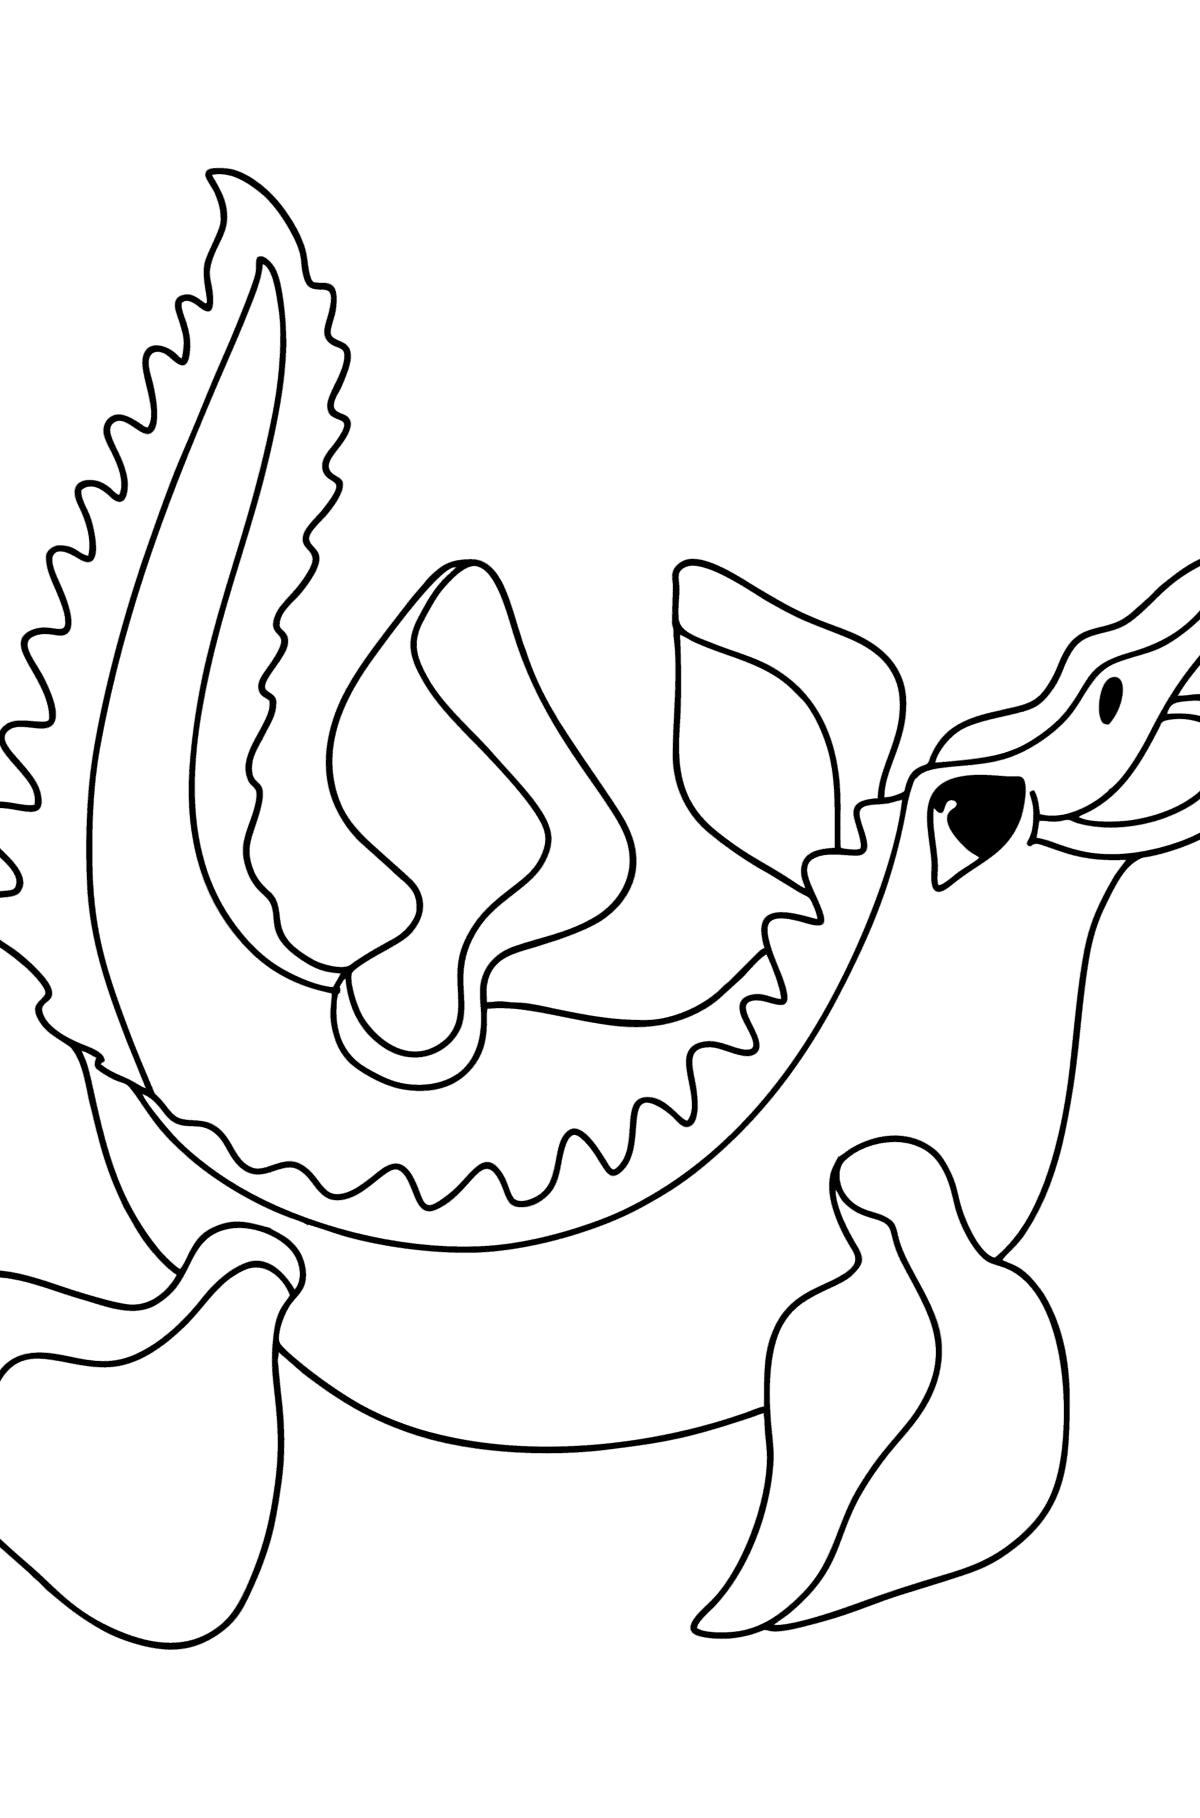 Mosasaurus coloring page - Coloring Pages for Kids